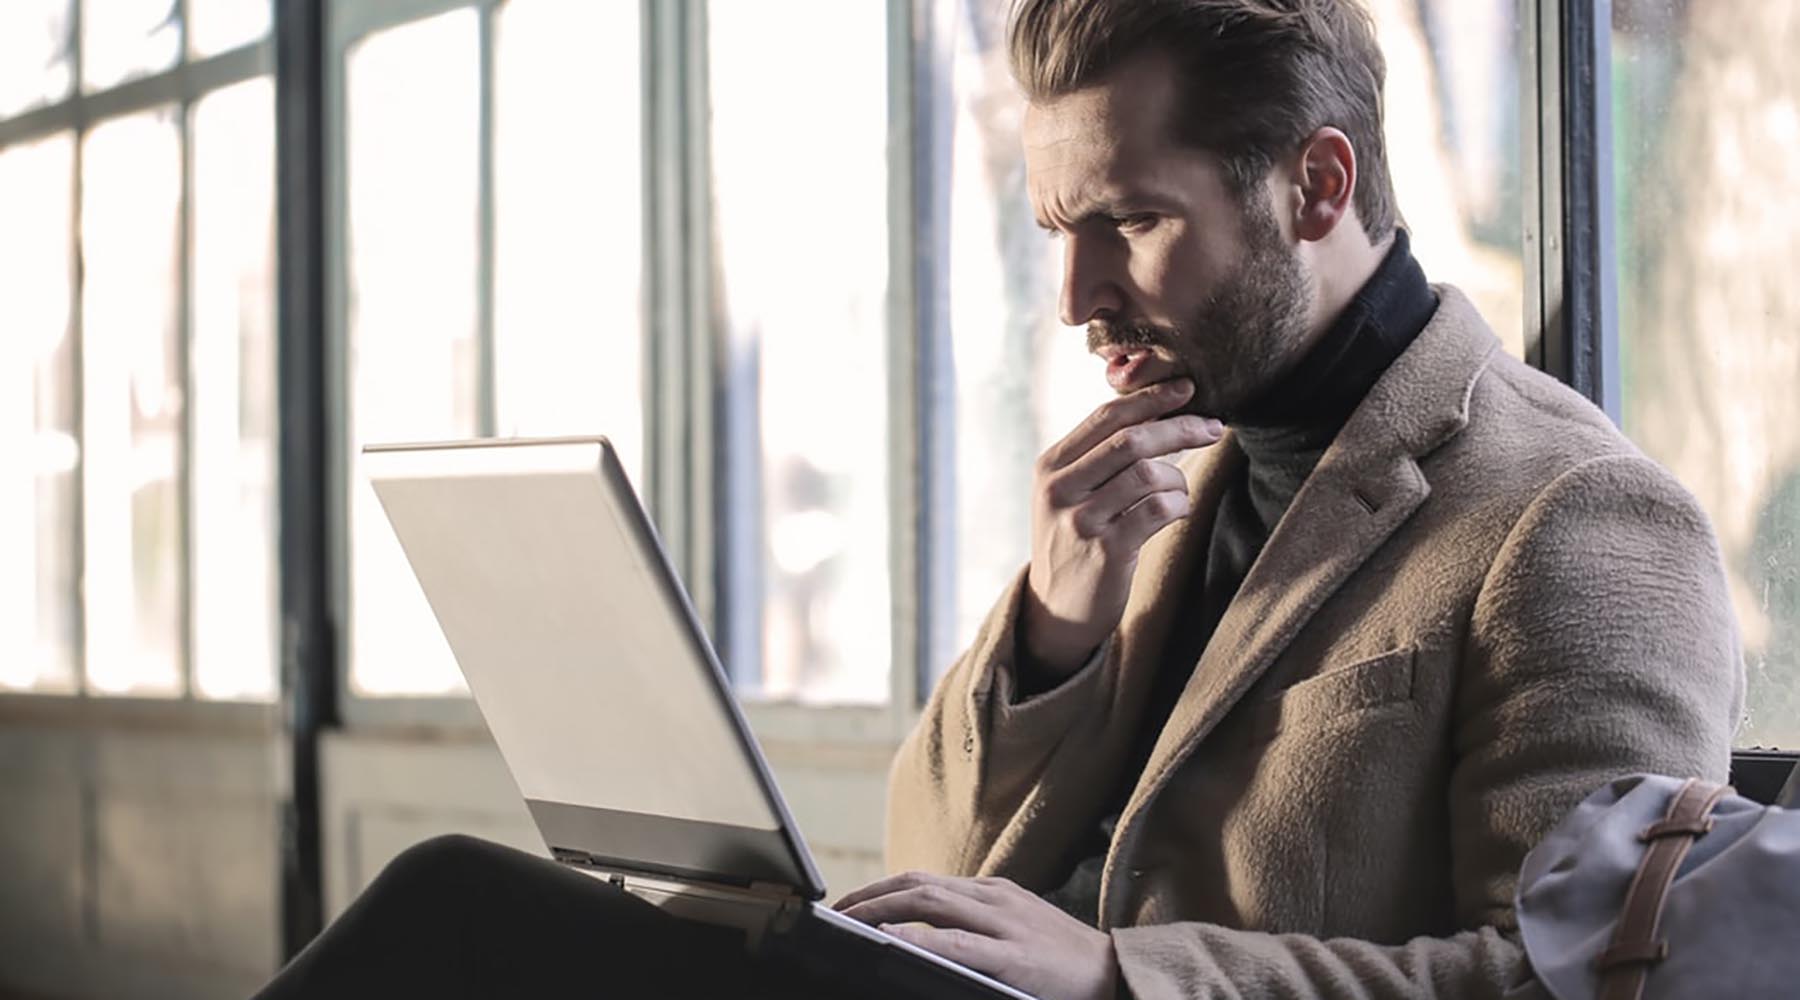 confused looking man staring at laptop with hand on chin wearing brown fuzzy jacket